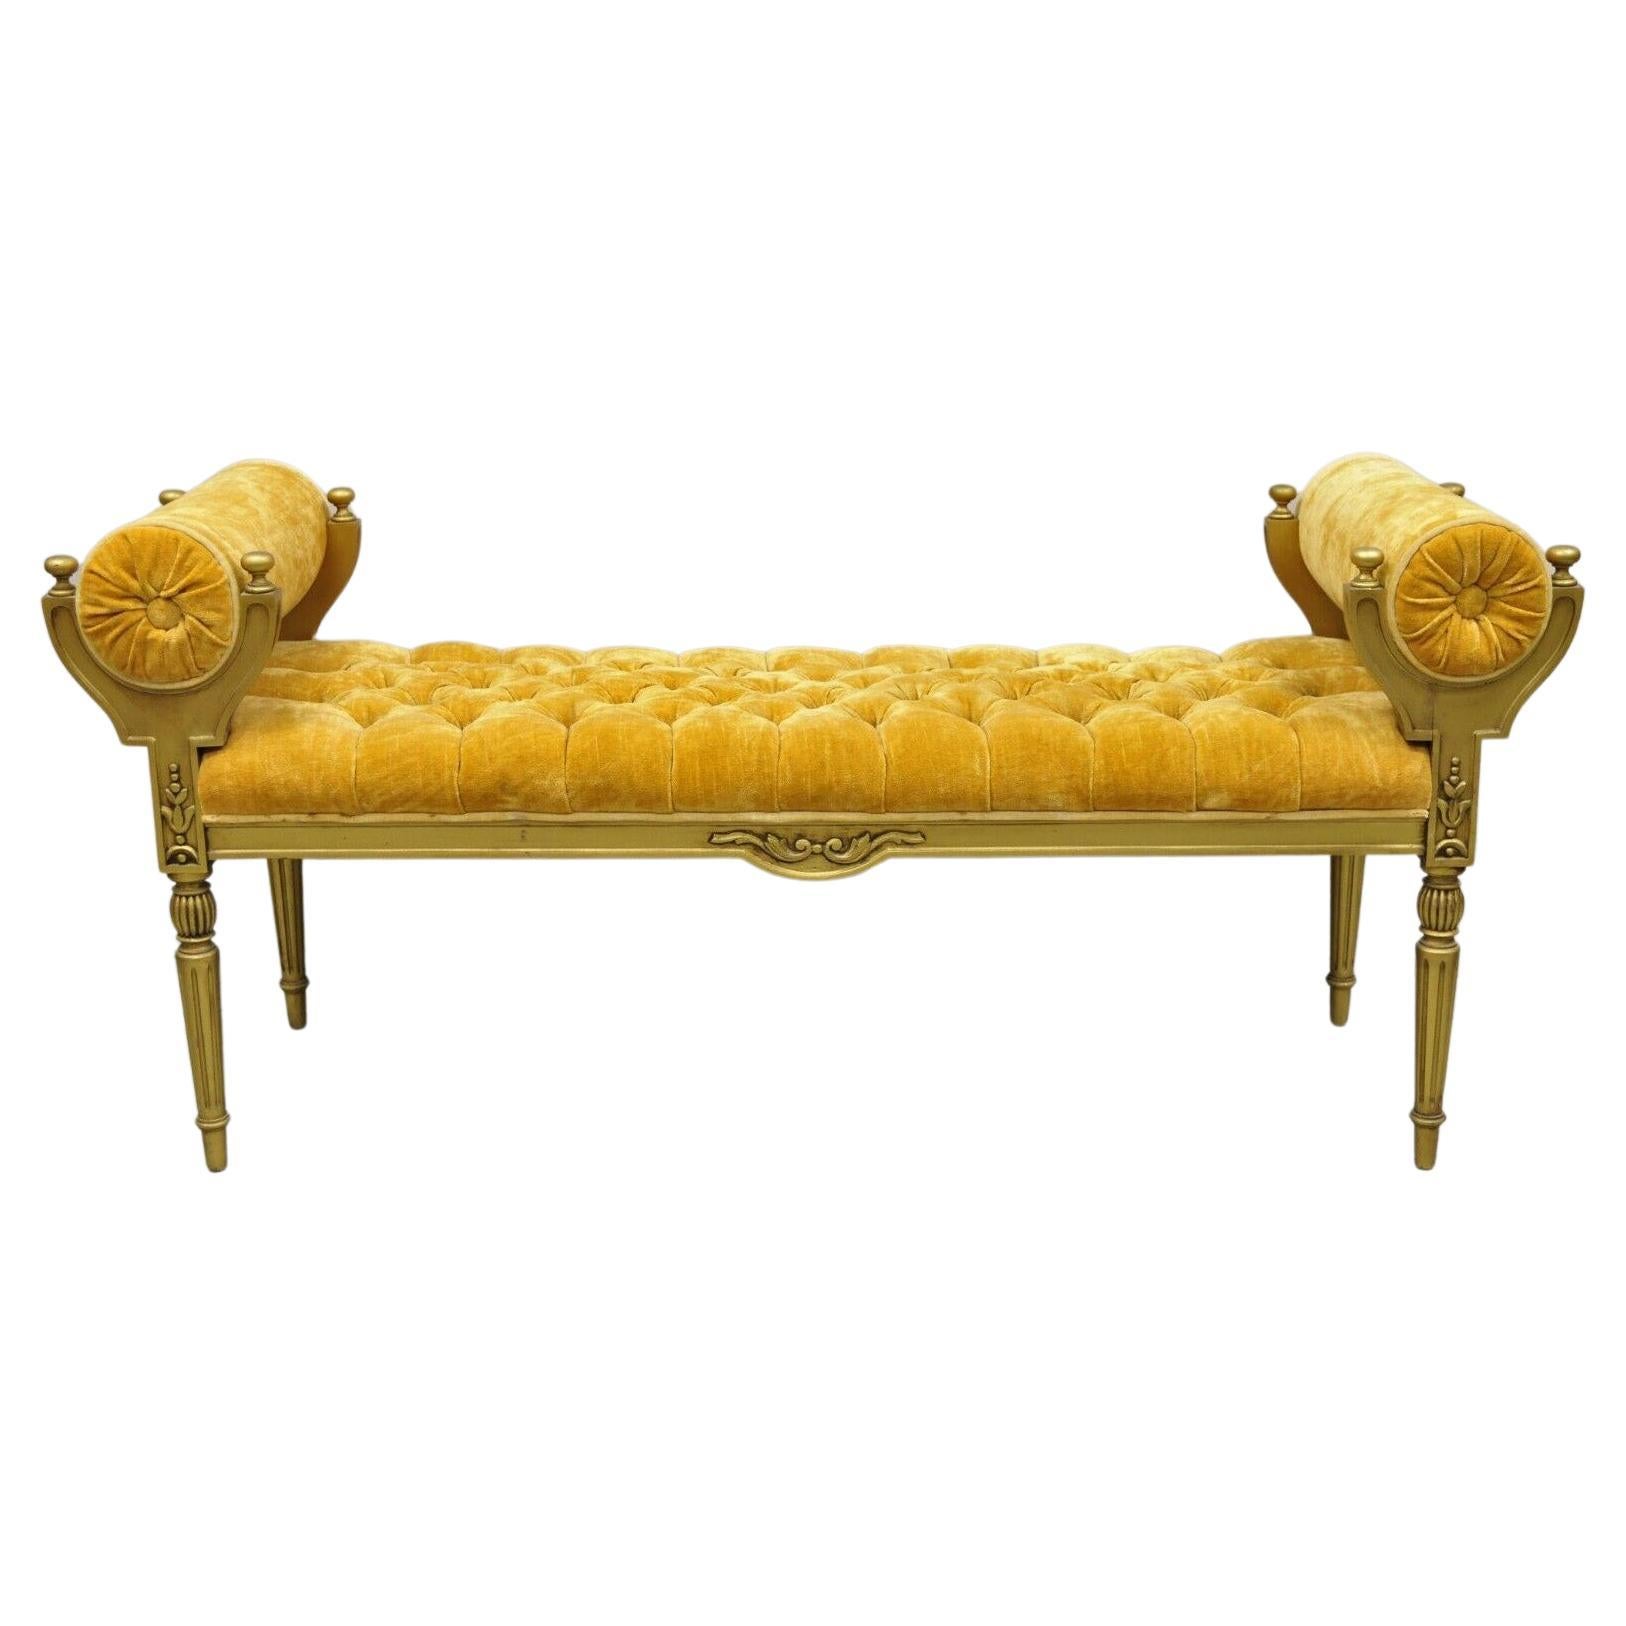 Vintage Gold Hollywood Regency French Style Window Bench with Tufted Upholstery